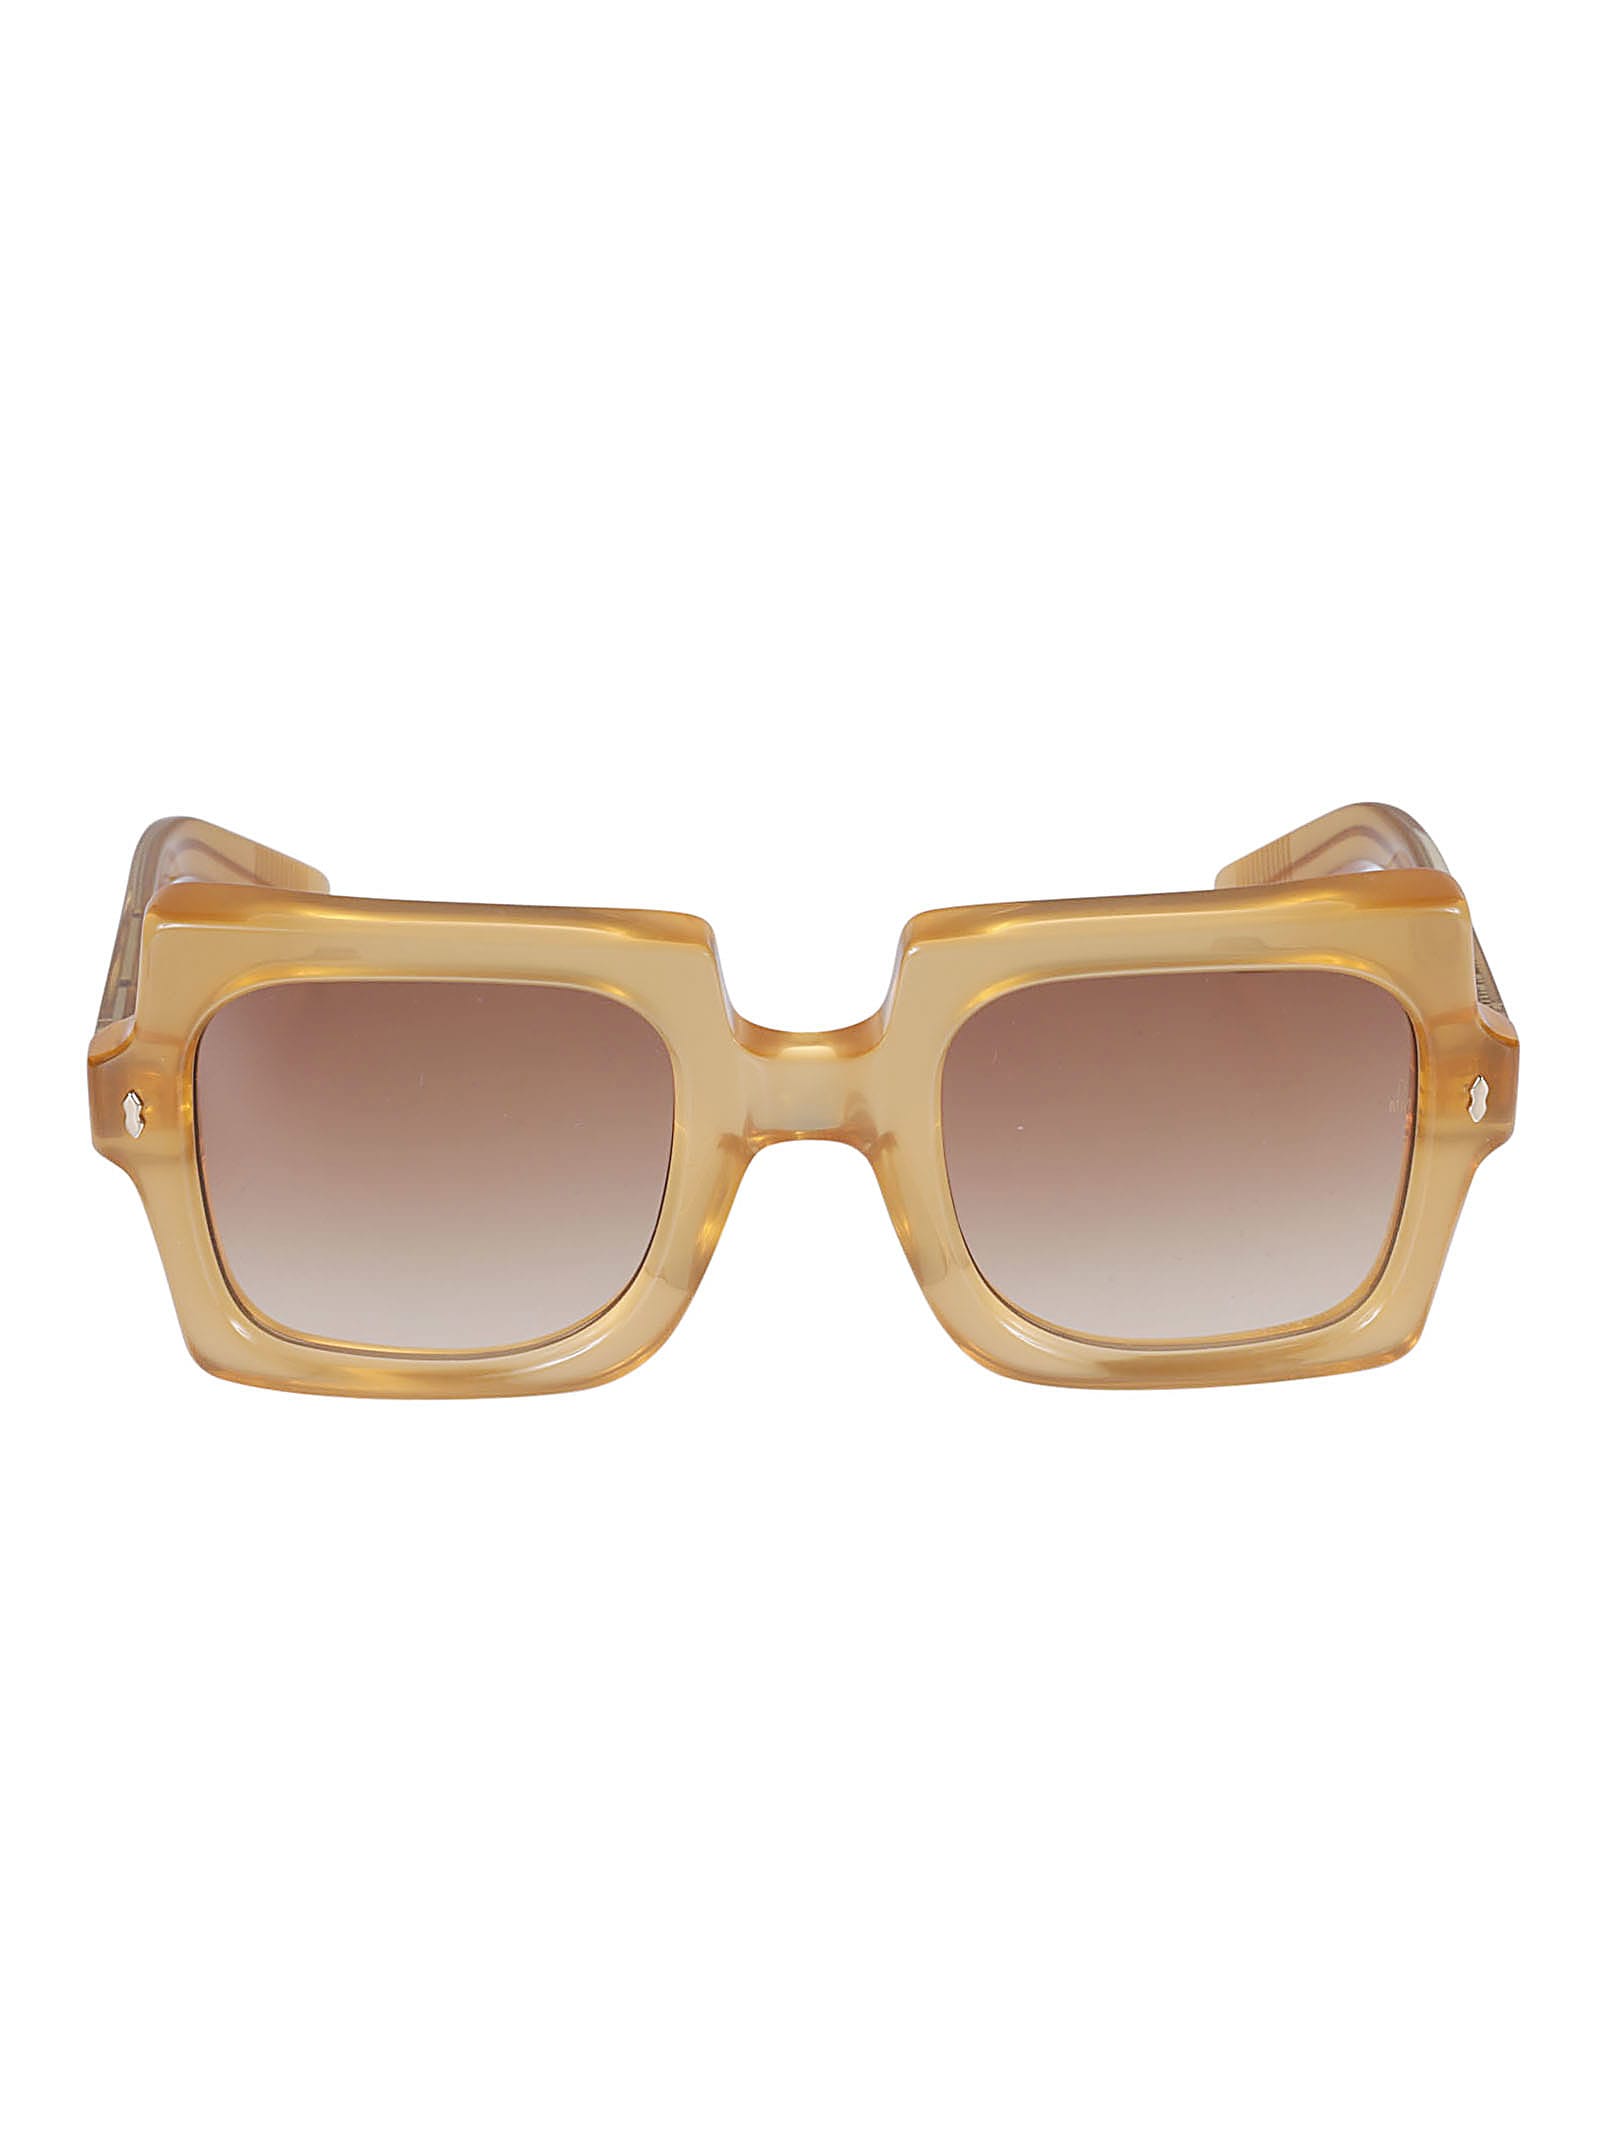 Jacques Marie Mage Square Frame Sunglasses In Wax